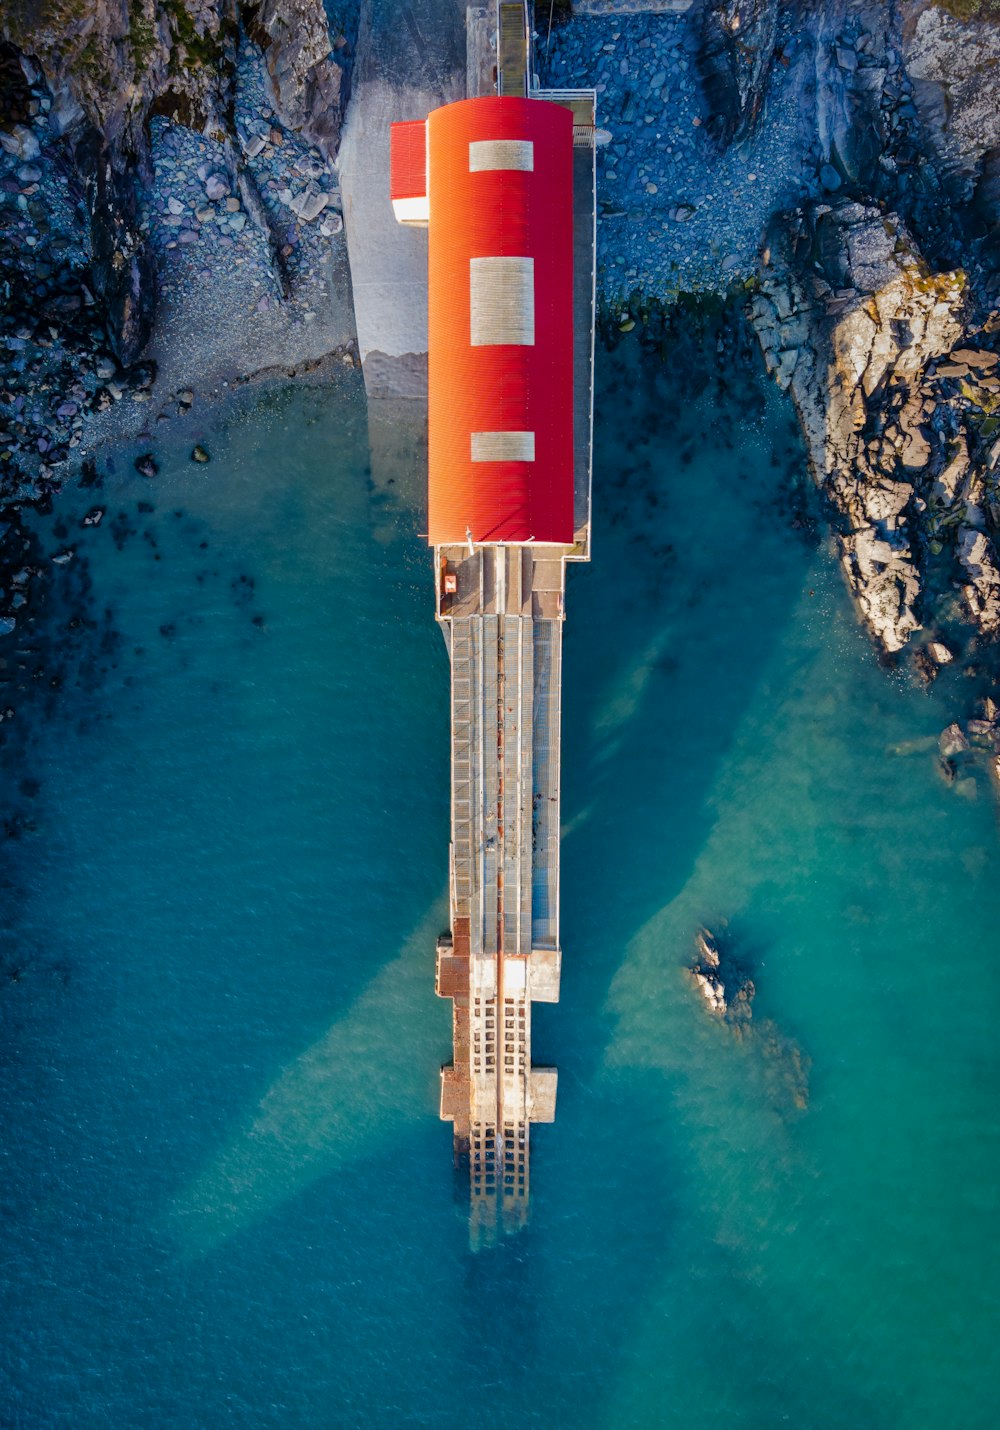 red and white tower near body of water during daytime